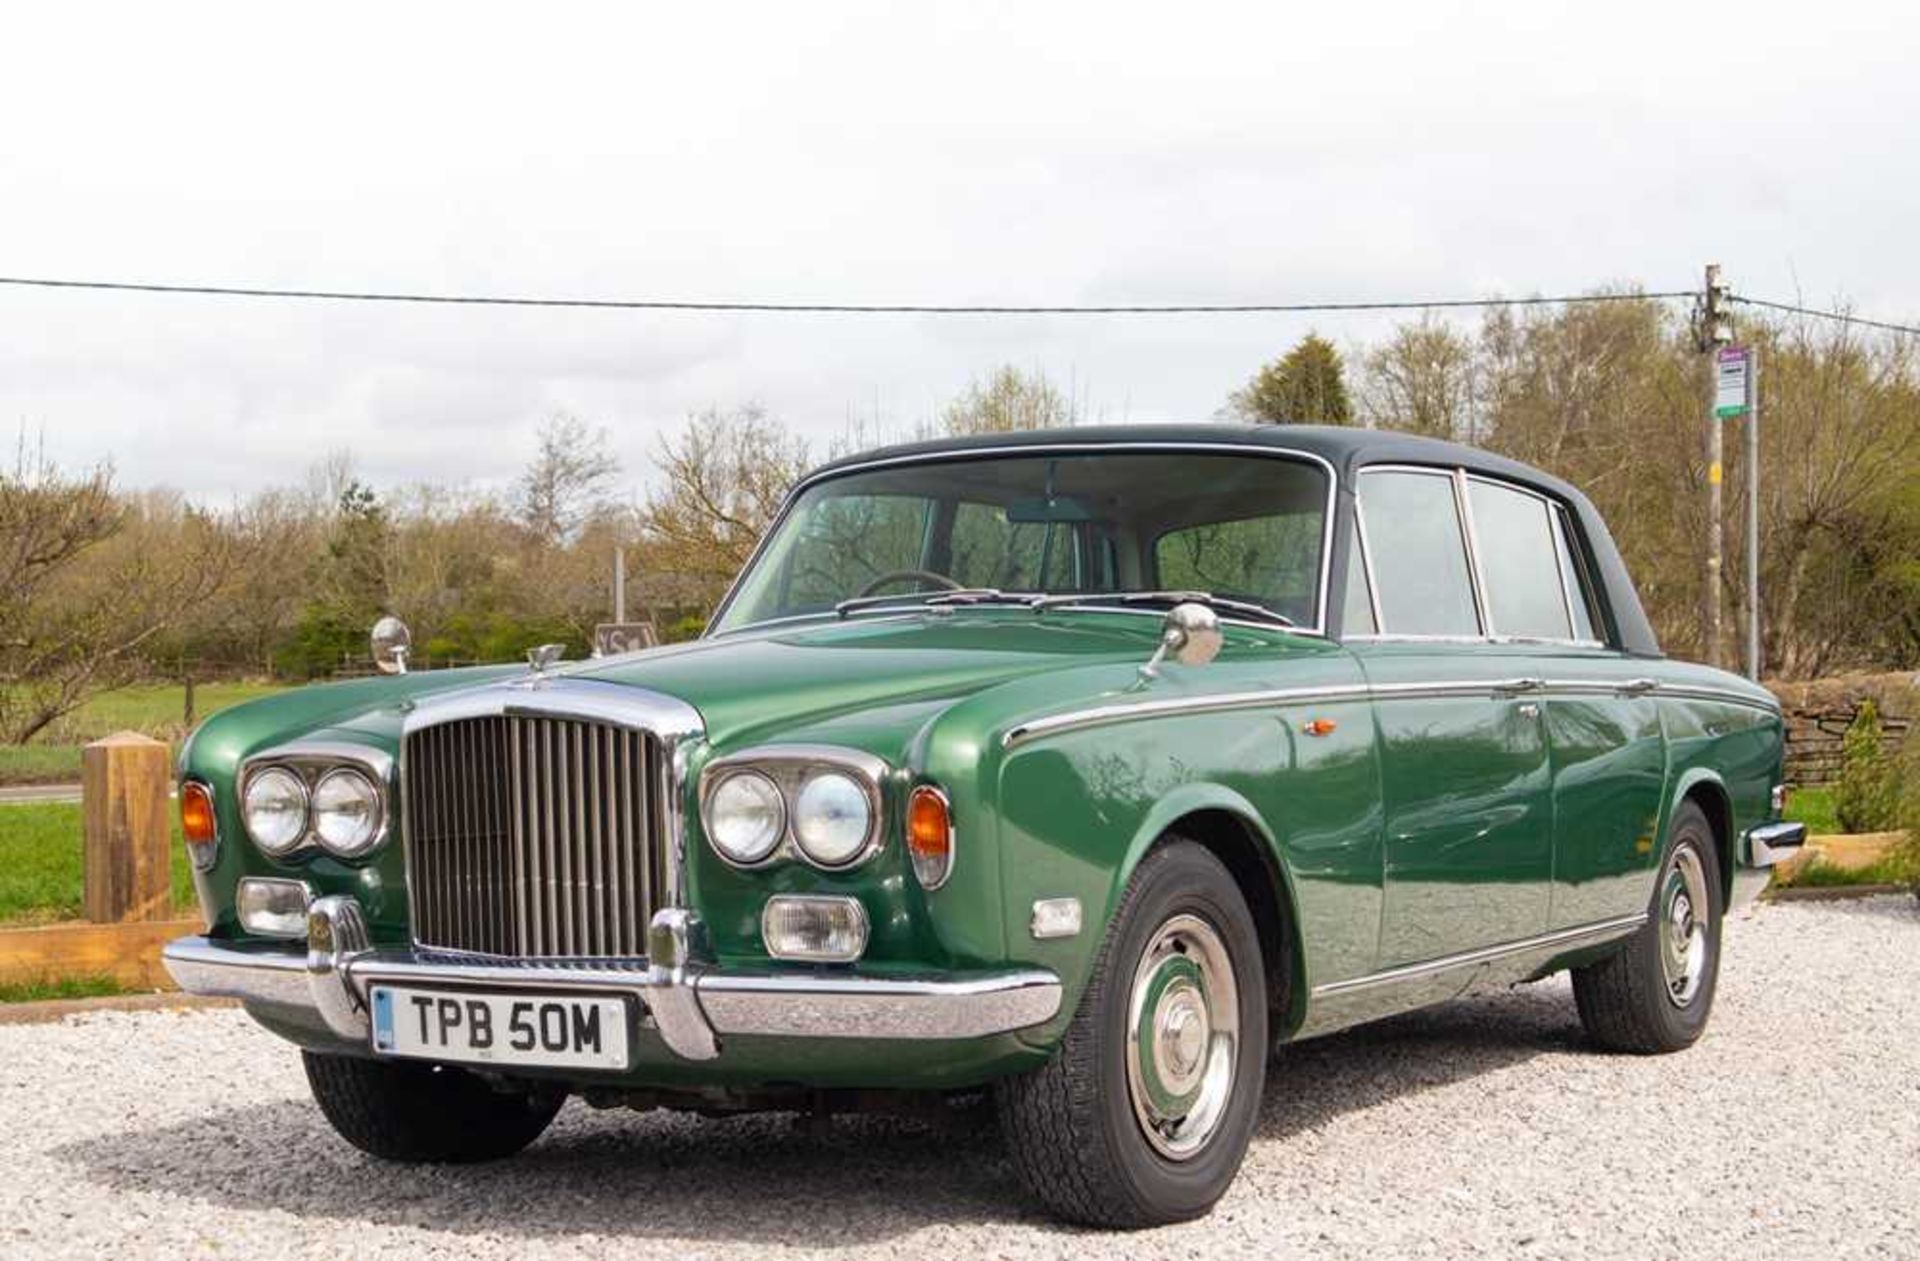 1973 Bentley T-Series Saloon Formerly part of the Dr James Hull and Jaguar Land Rover collections - Image 2 of 22